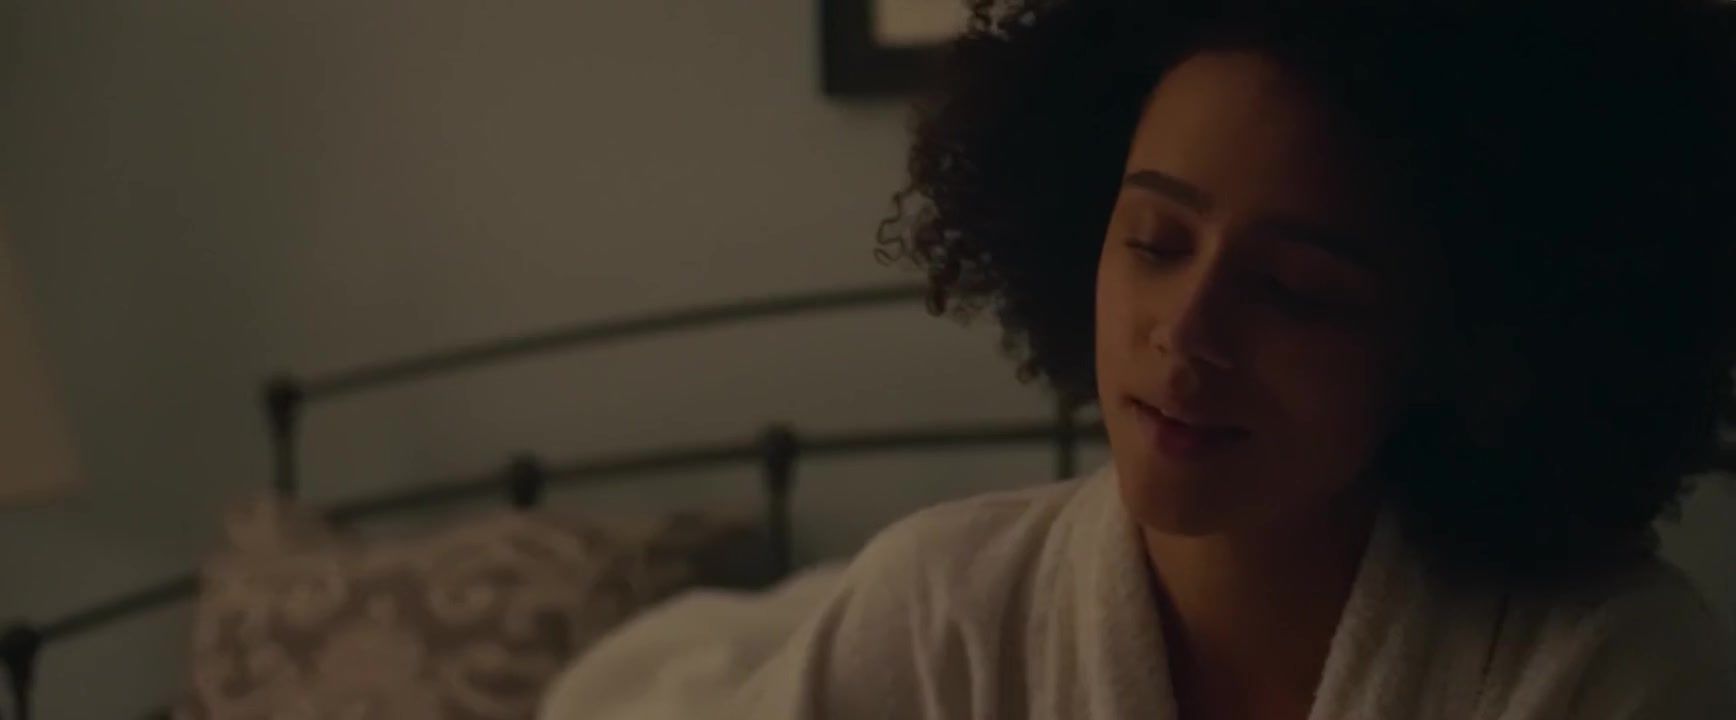 Gay Uncut Black Nathalie Emmanuel joins white co-star Britt Lower nude in Holly Slept Over (2020) Bitch - 2